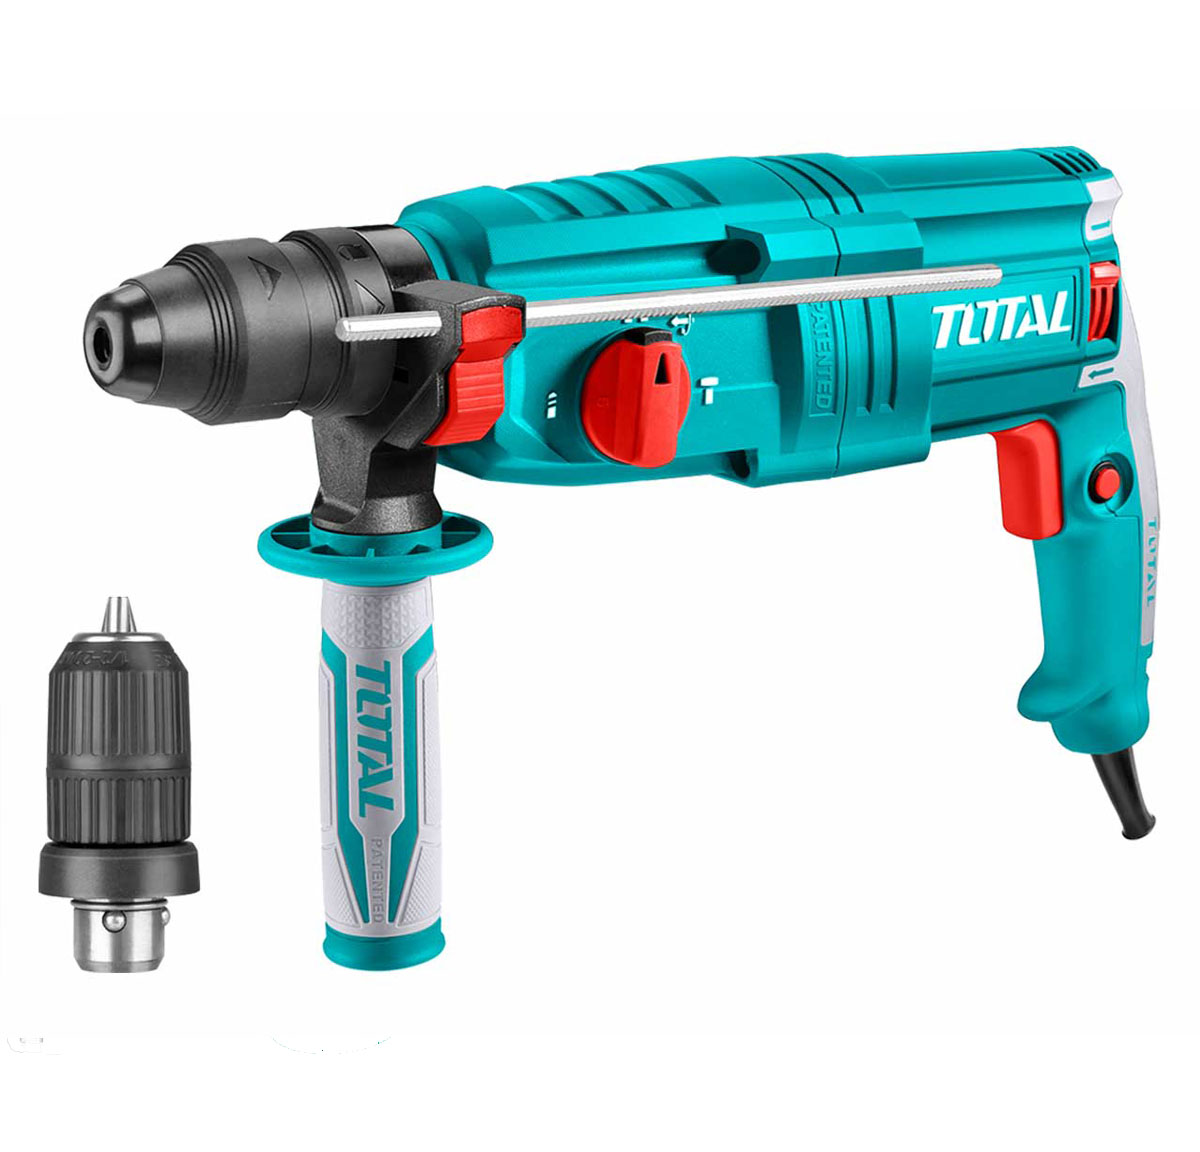 Total Rotary hammer 800W TH308268-2